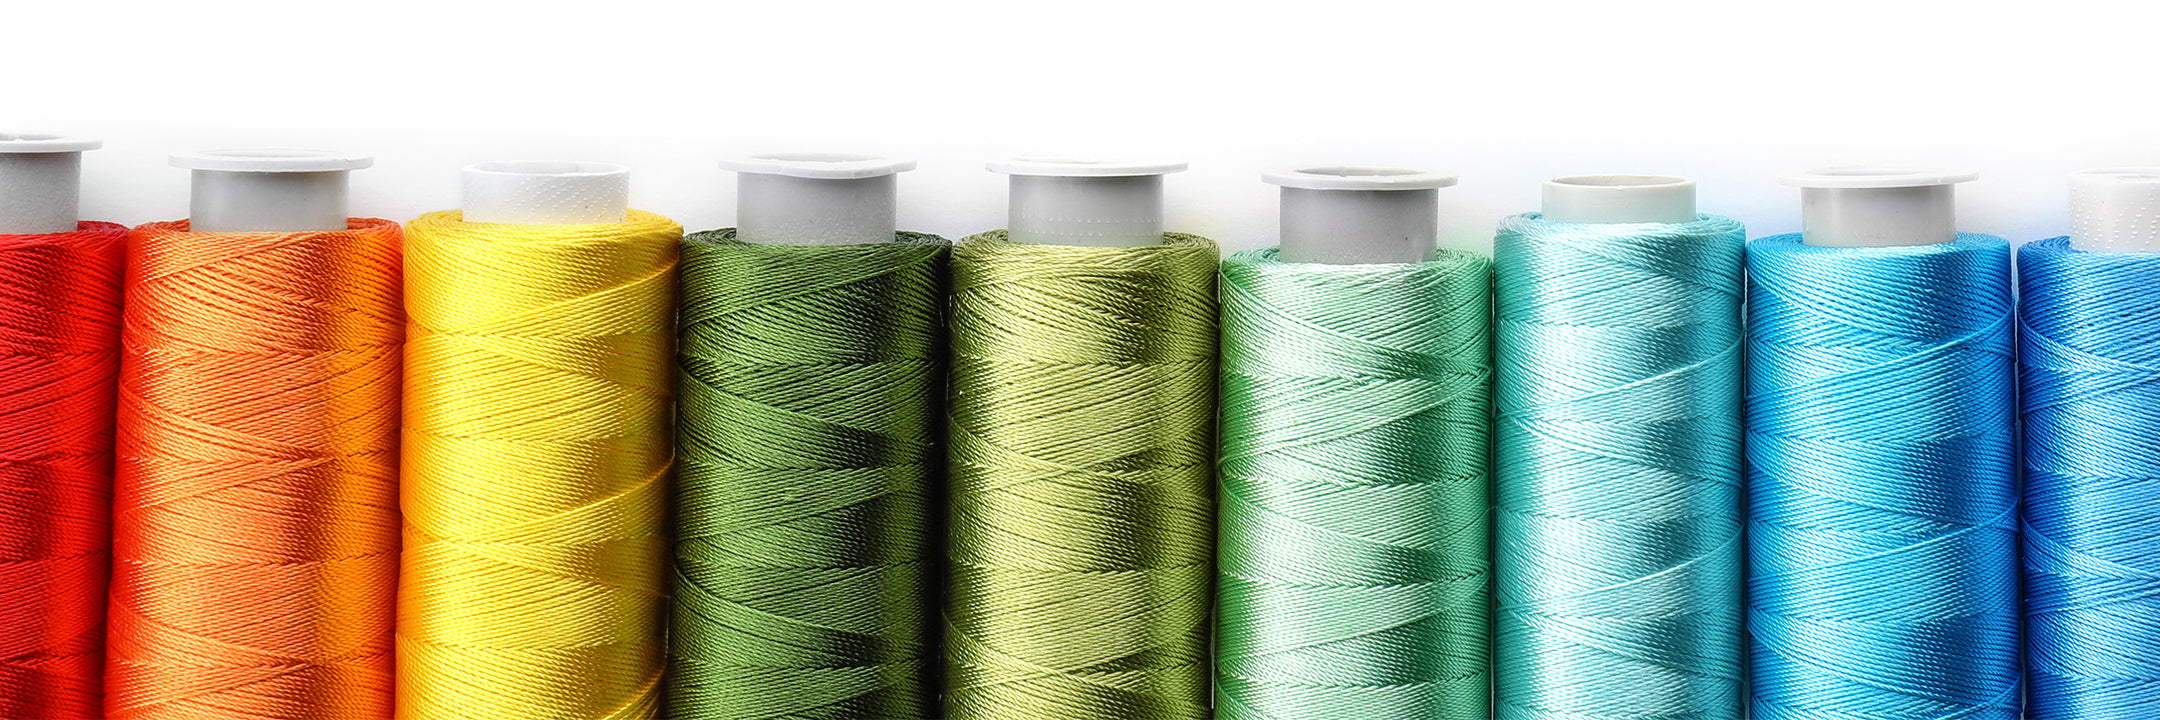 Mandala Crafts Mandala crafts All Purpose Sewing Thread Spools - green Serger  Thread cones 4 Pack - 20S2 24000 Yds green Polyester Thread for O